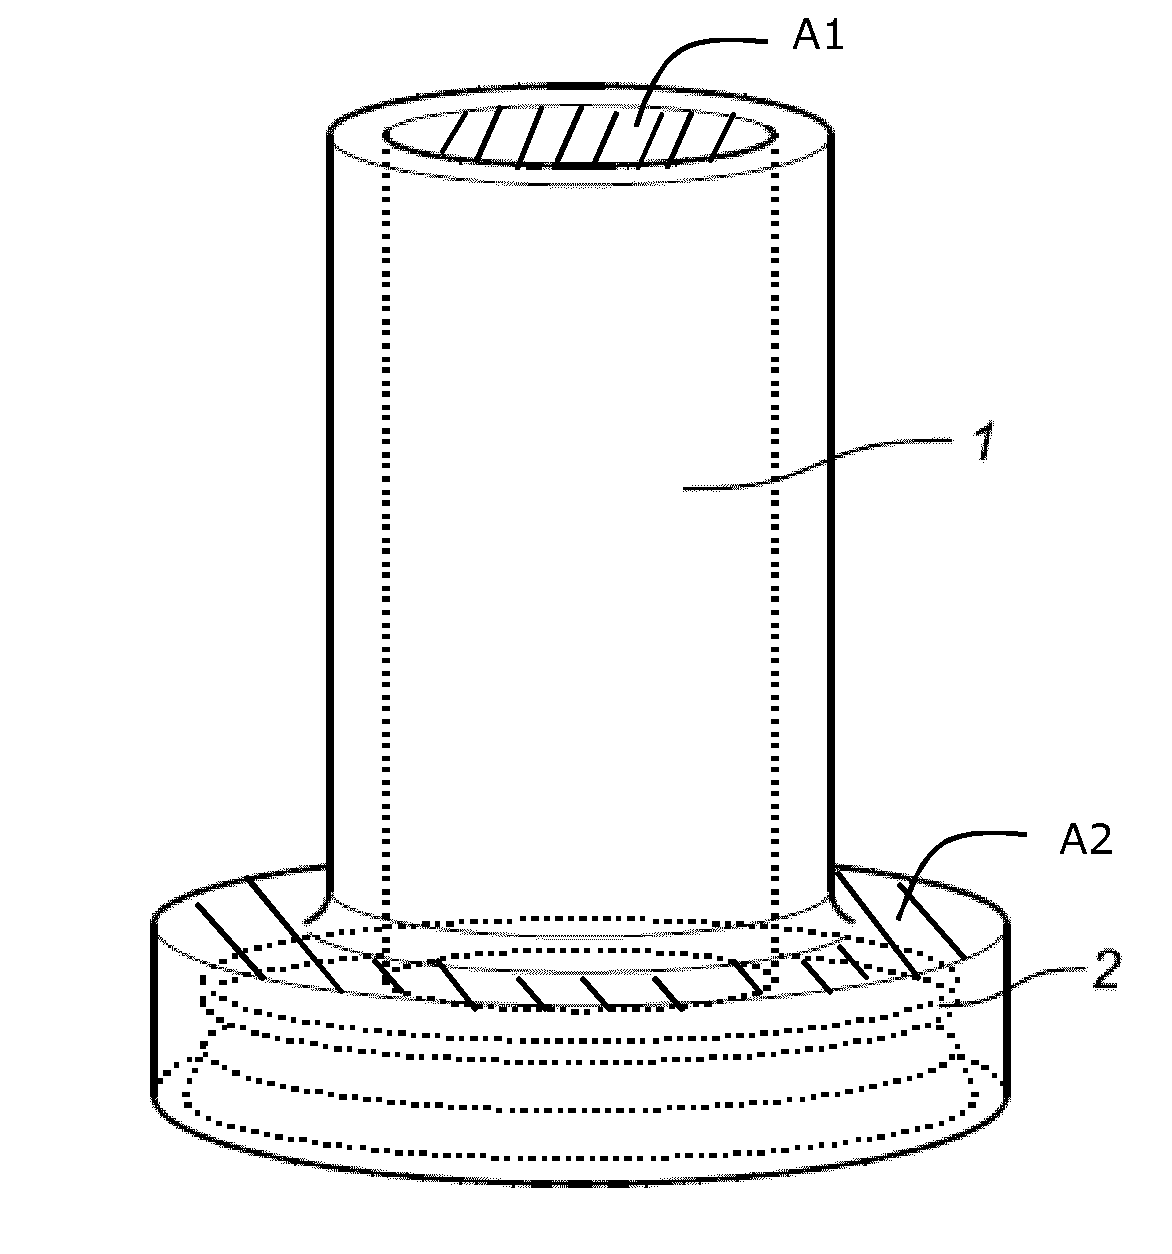 Liquid medium and sample vial for use in a method for detecting cancerous cells in a cell sample